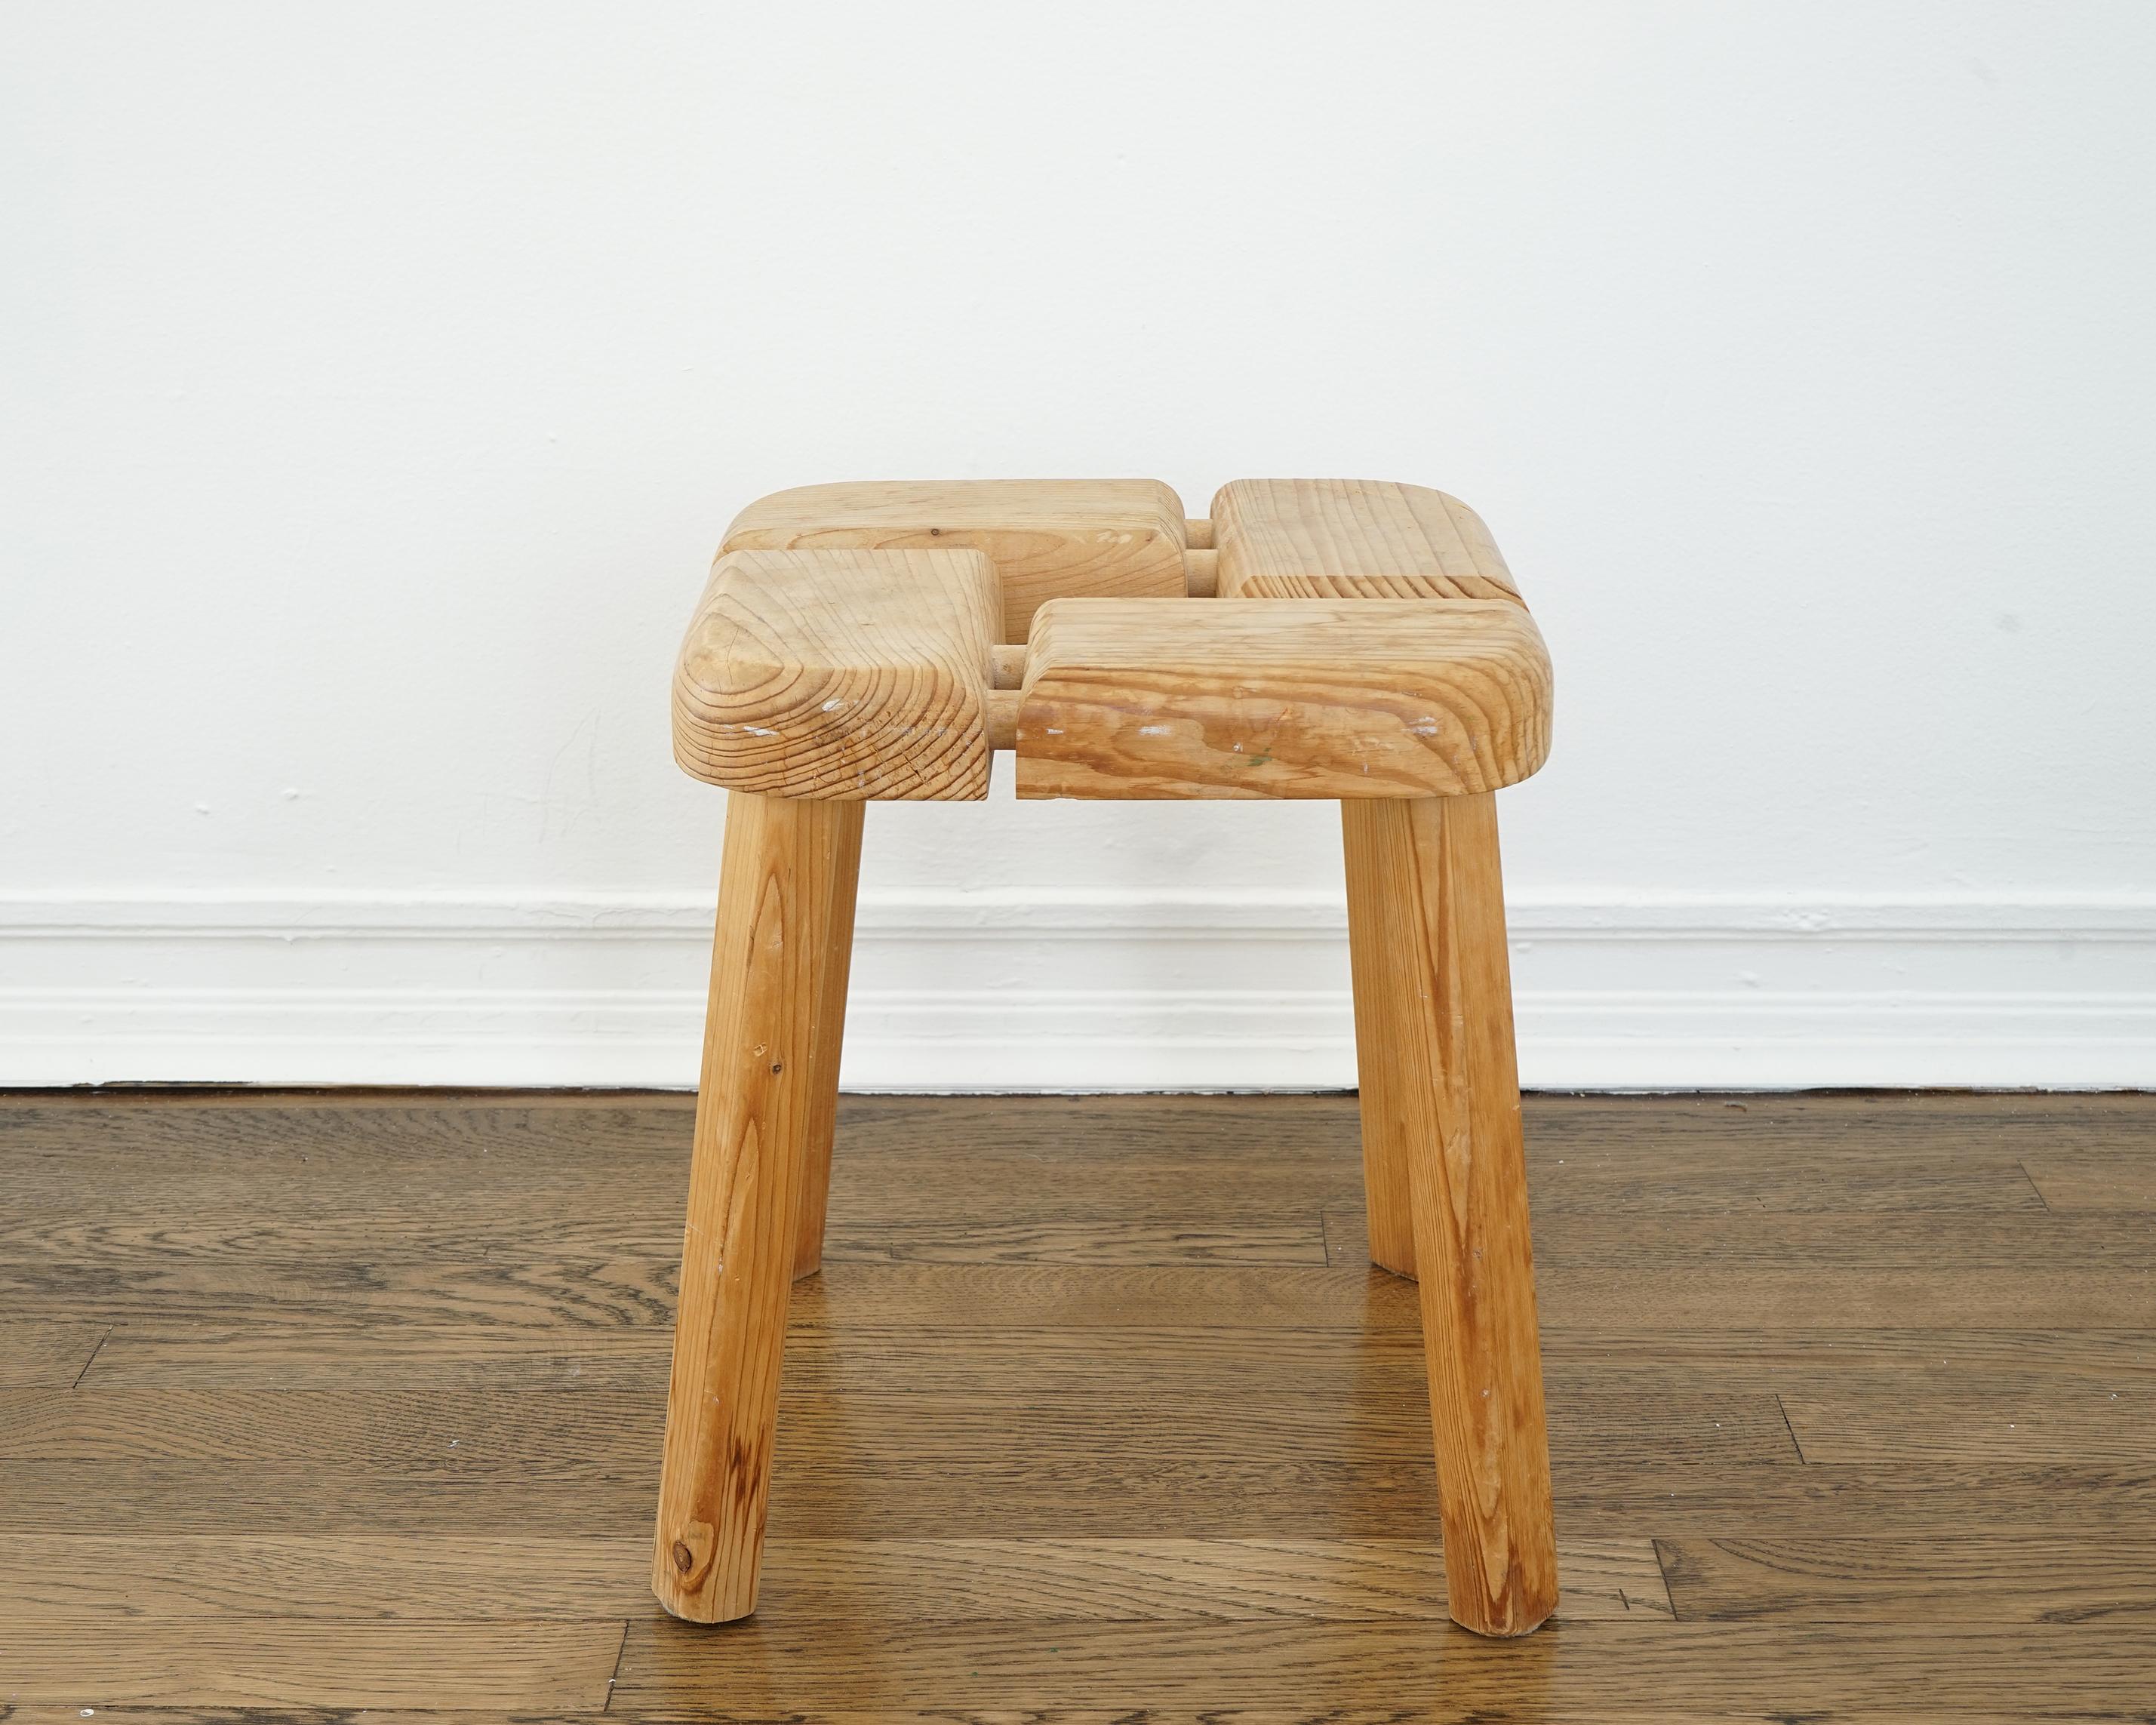 Vintage pine stool from Finland attributed to Olof Ottelin

Early 1960's

Measures: 14